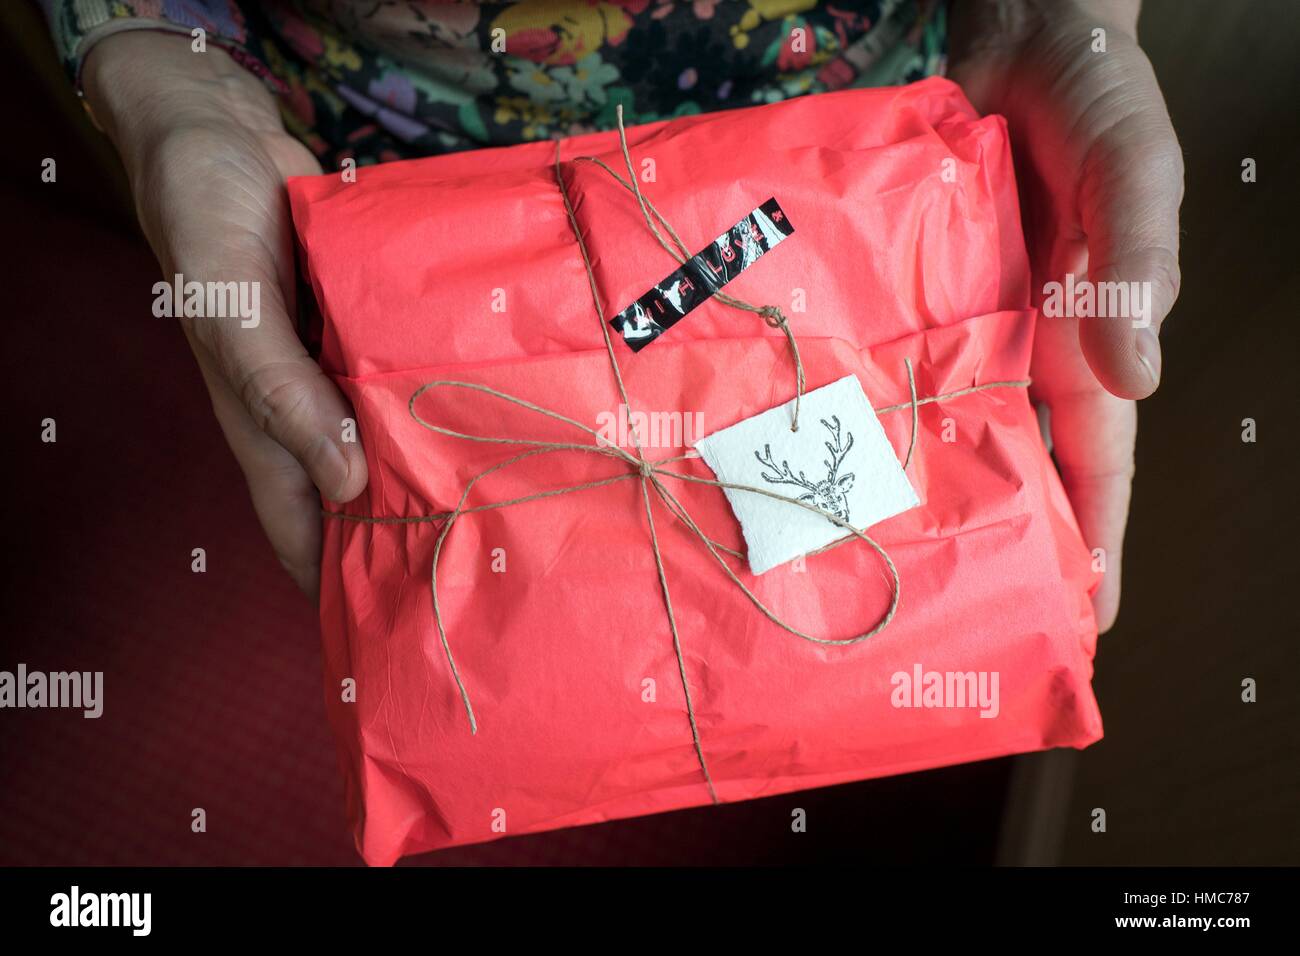 Woman hands holding Christmas gift in a red package with a deer label Stock Photo